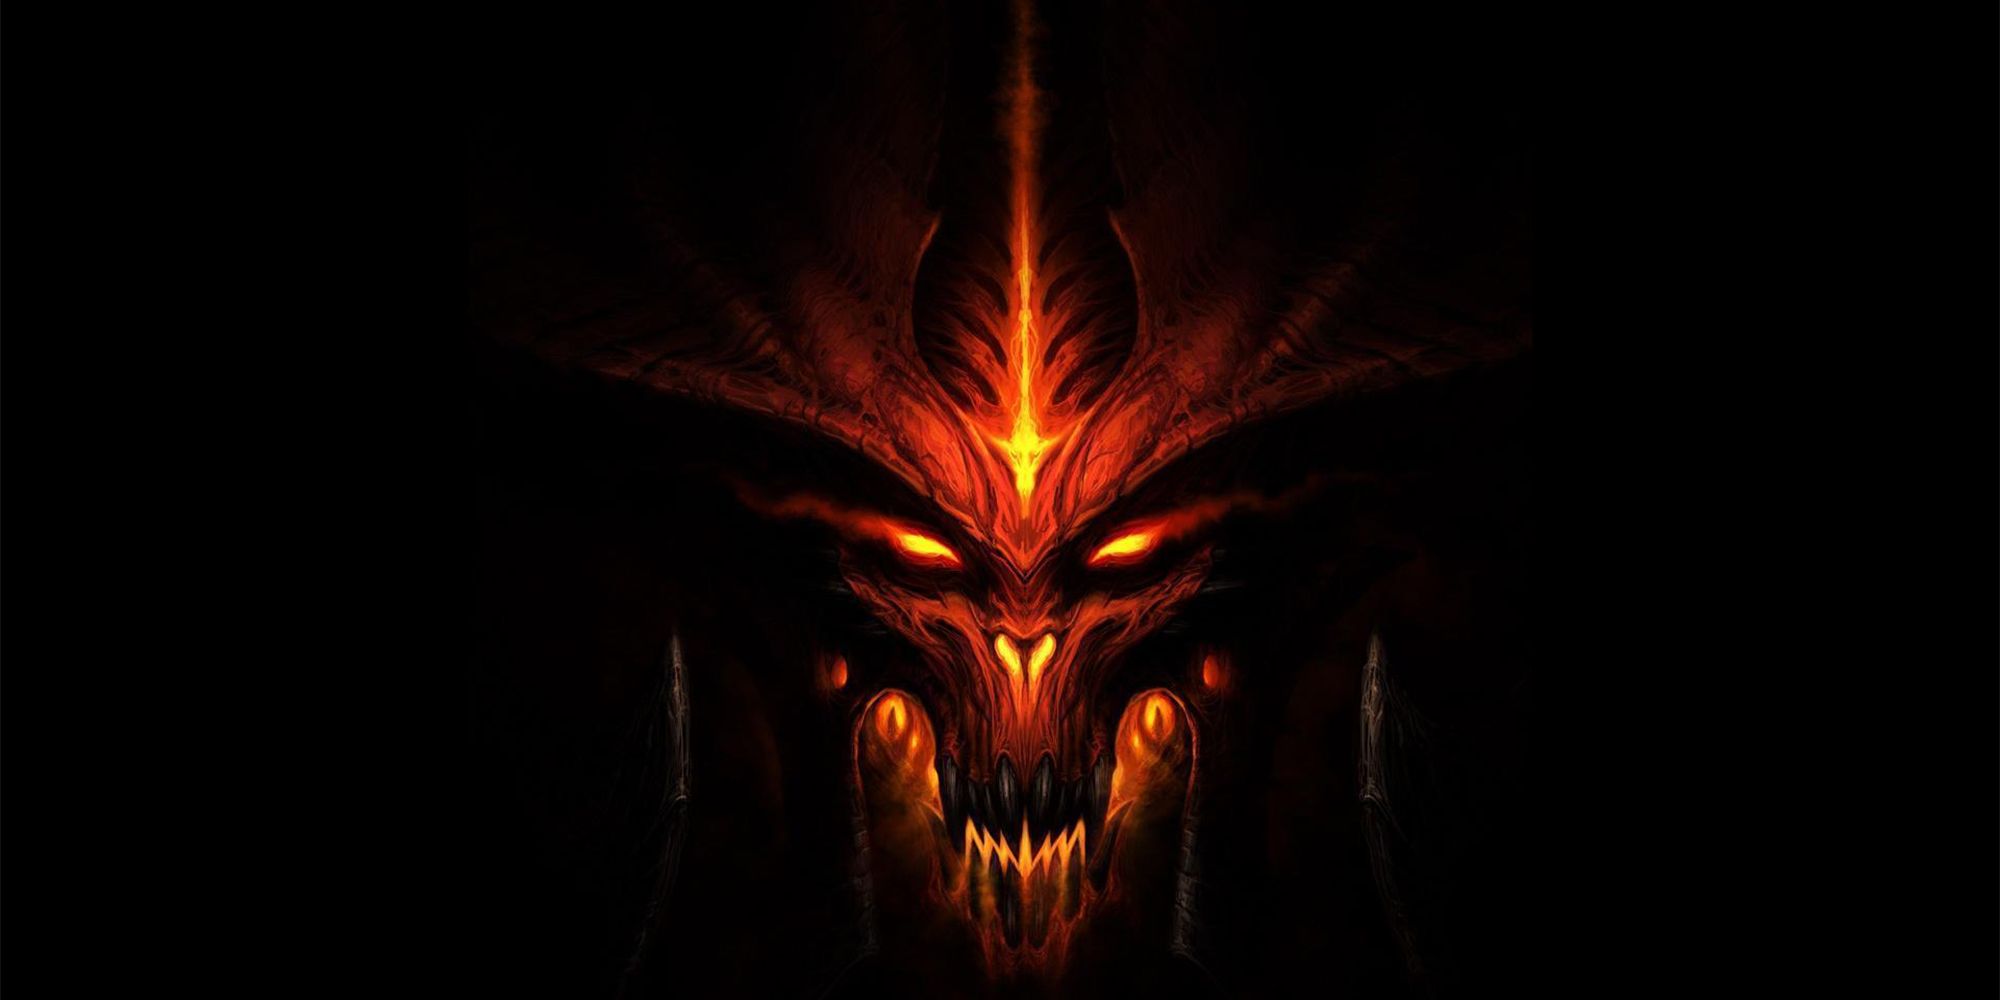 Blizzards Fighting For Diablo Trademark Over an Animated Dog